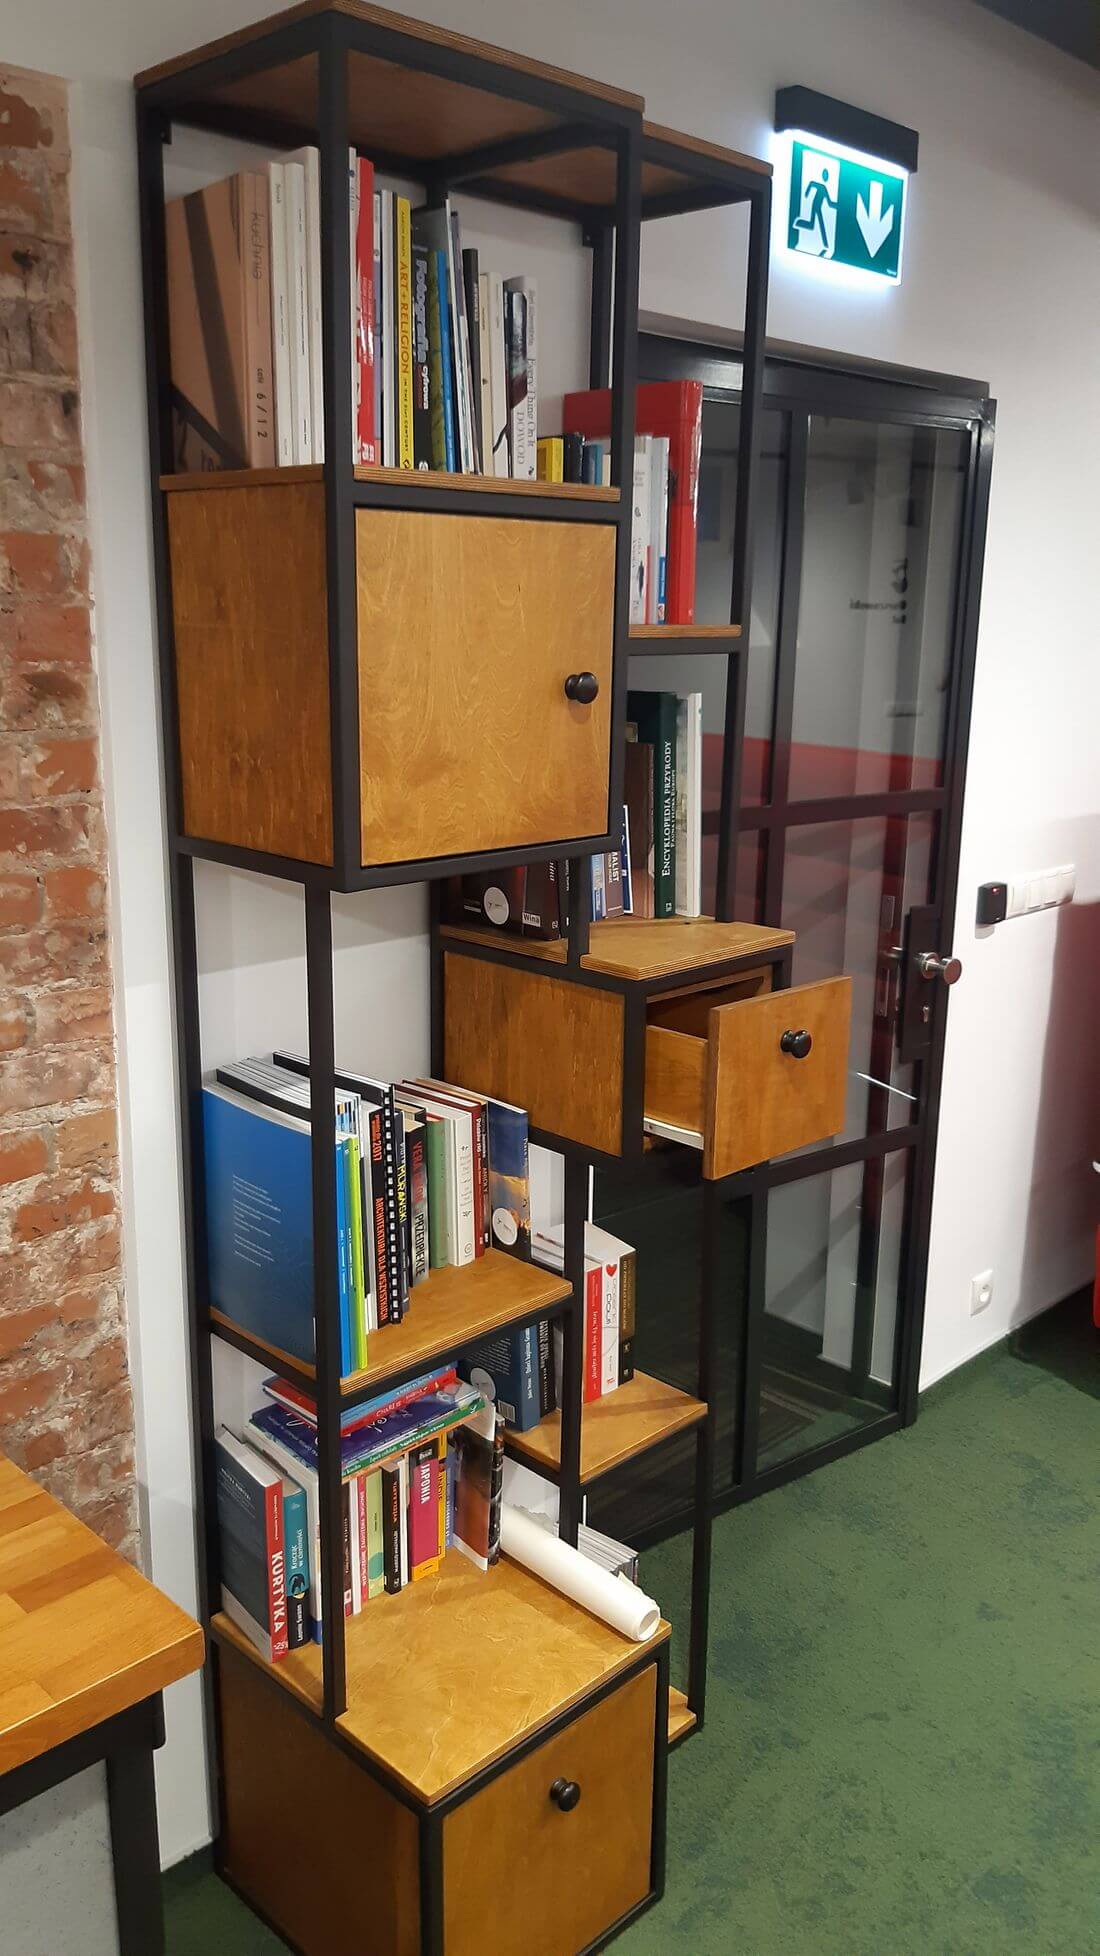 Wooden metal Loft Bookshelf R1 made in industrial style from structural steel and oak plywood